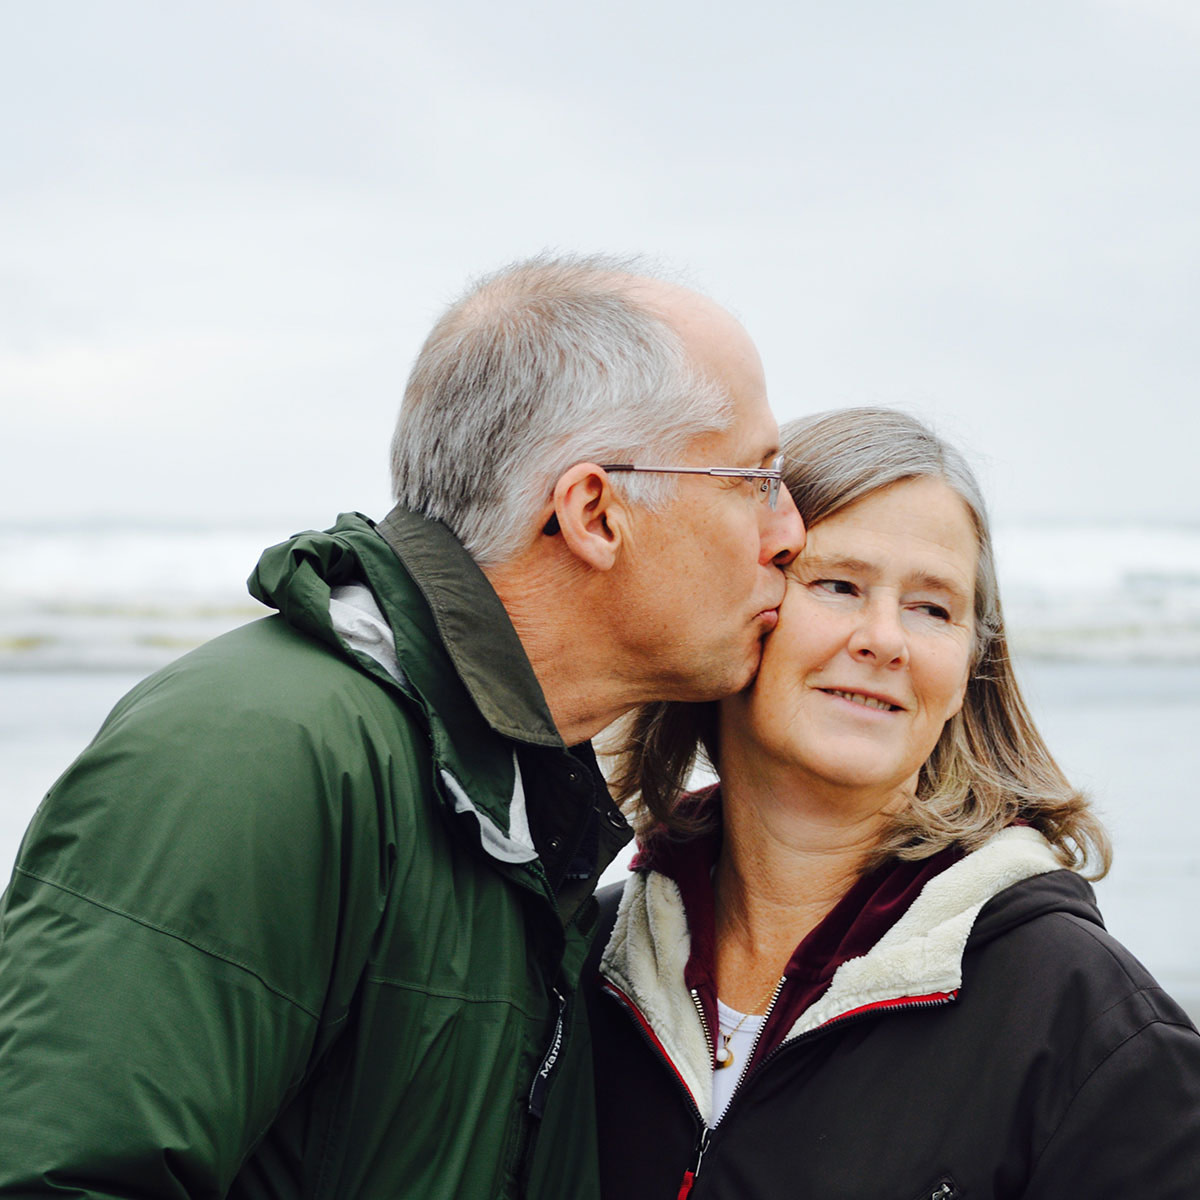 Older couple in walking clothes at the beach. Man is giving woman kiss on the cheek.